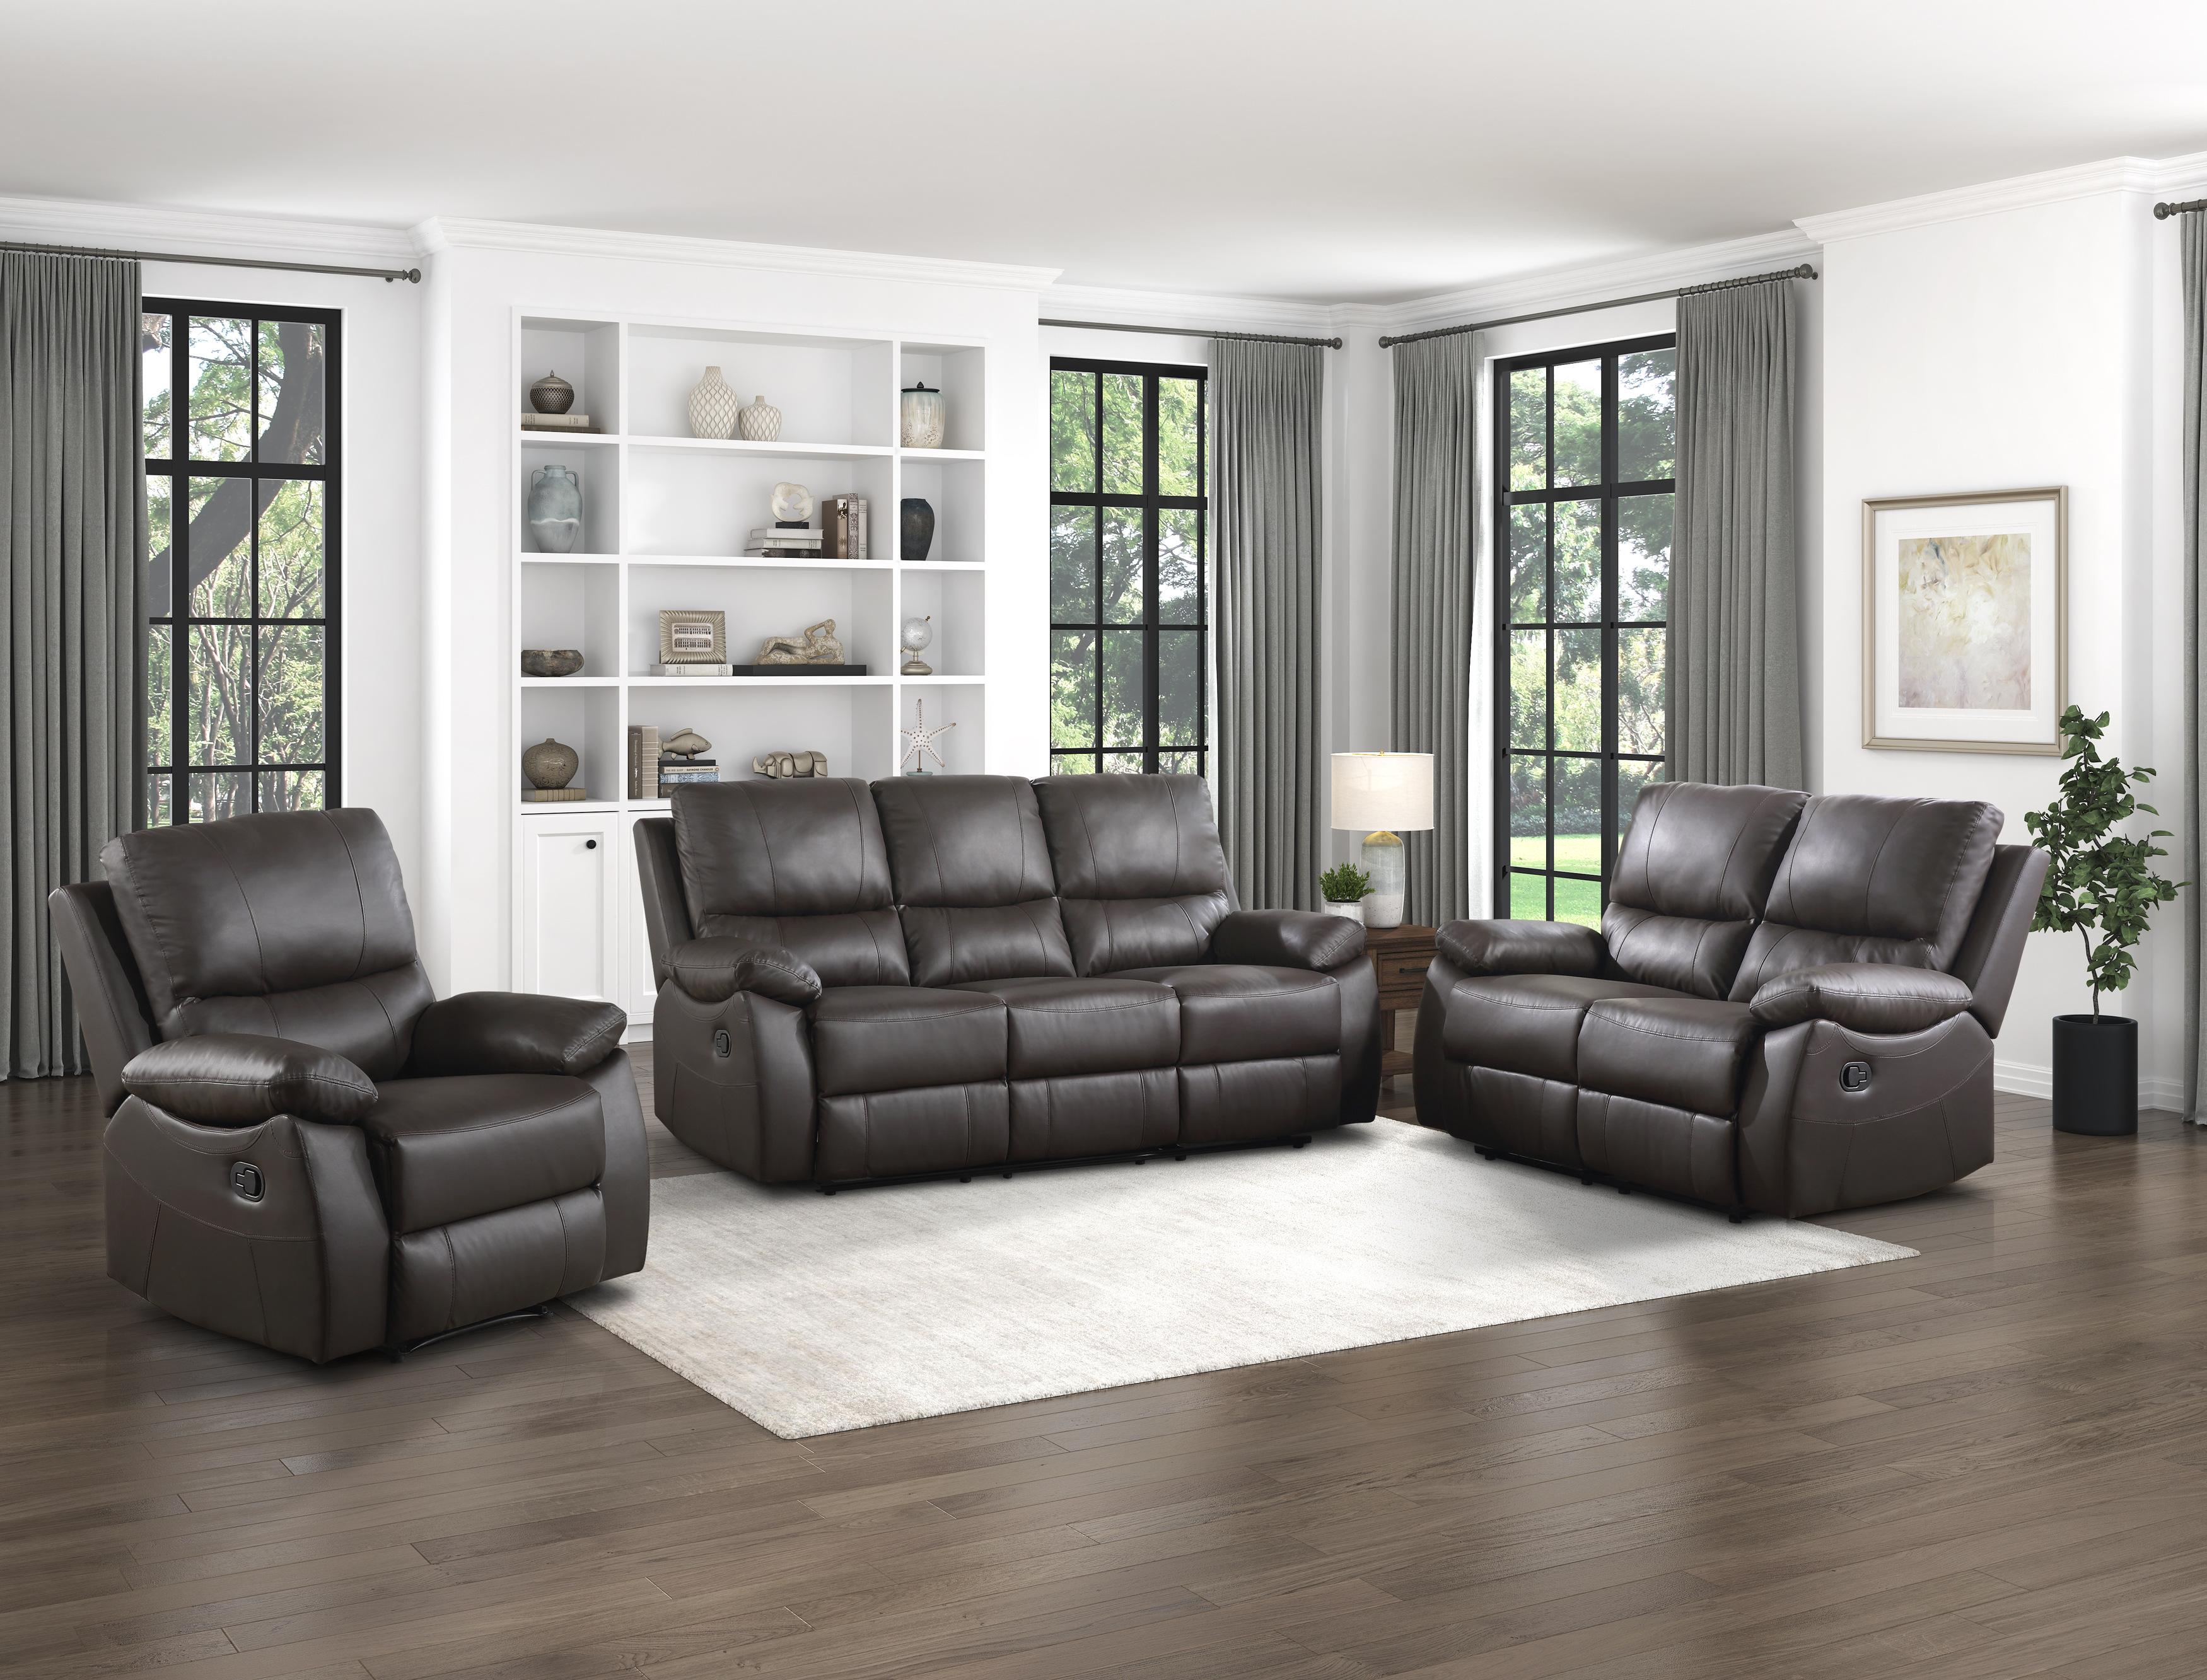 Contemporary Reclining Living Room Set Dawson Reclining Living Room Set 2PCS 9368BRW-3-S-2PCS 9368BRW-3-S-2PCS in Brown Faux Leather